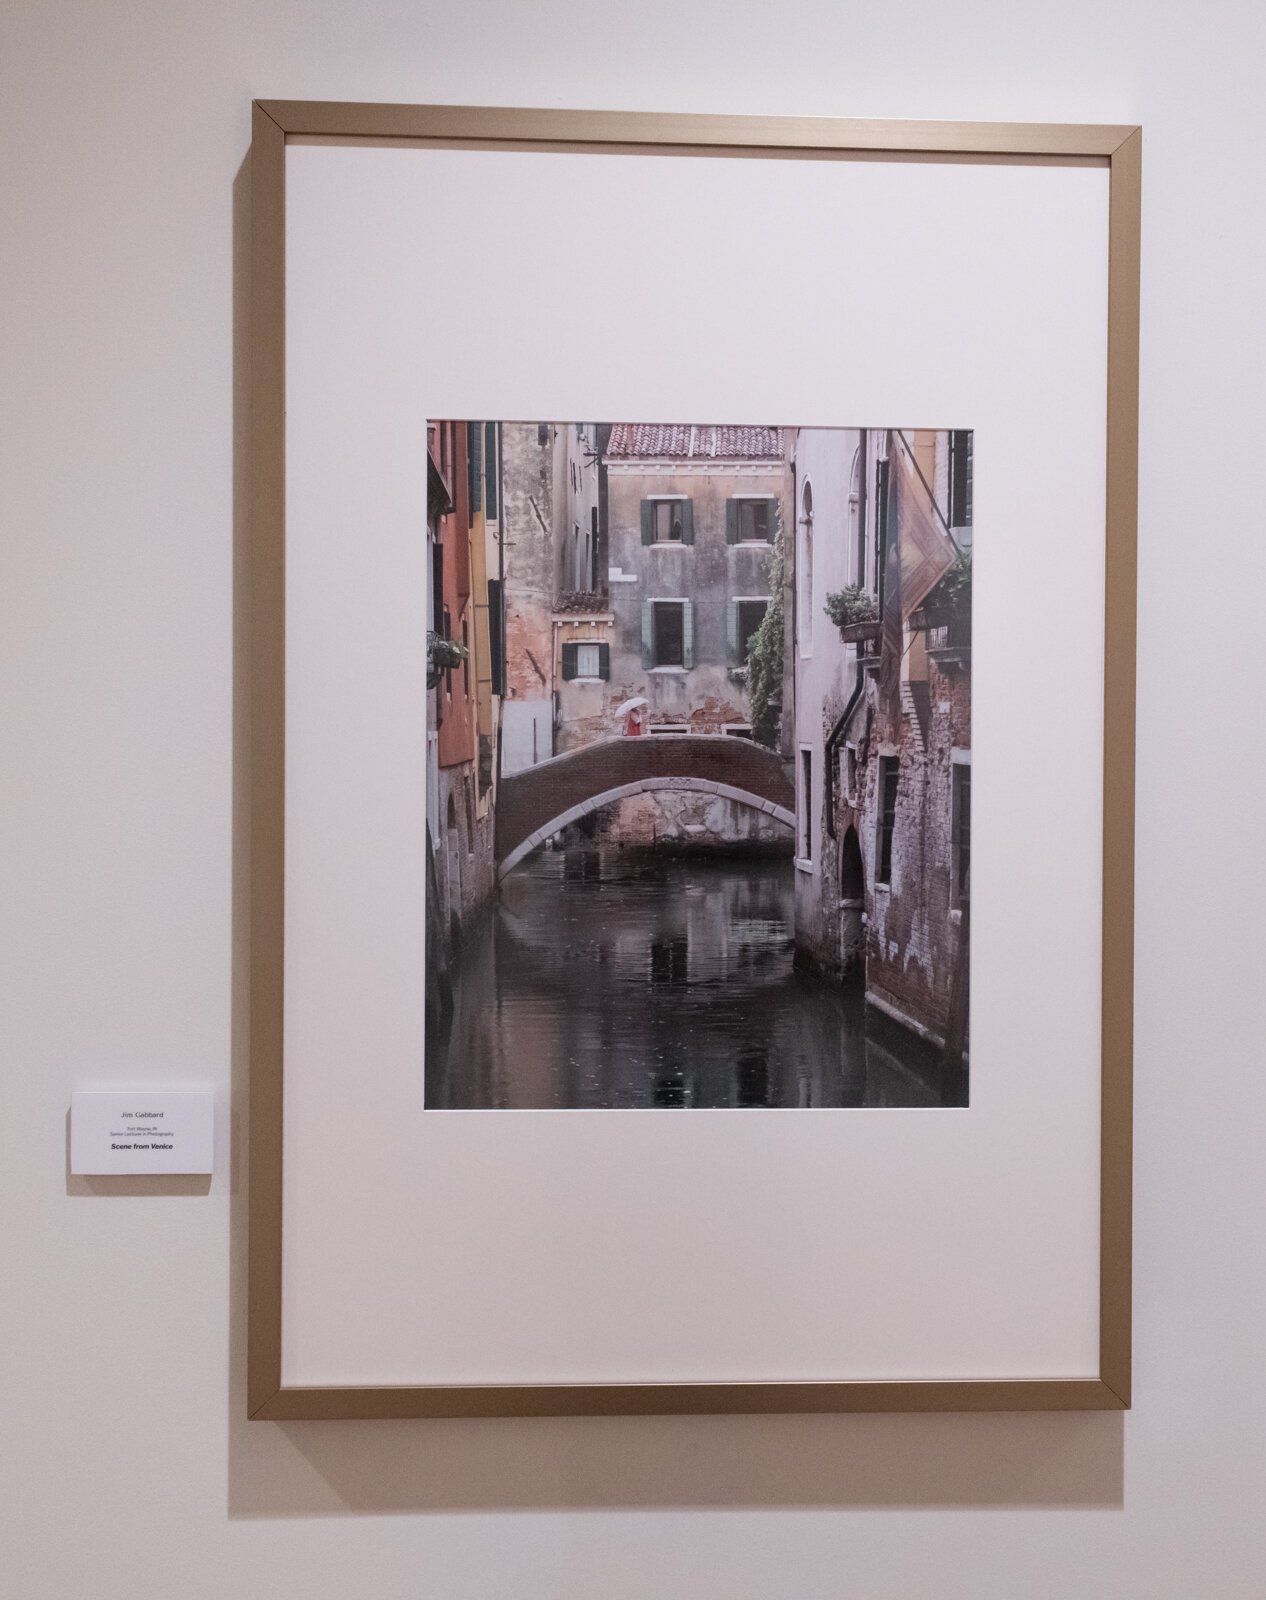 Jim Gabbard, who is a Senior Lecturer in Photography at PFW, has this piece hanging at The Gallery.